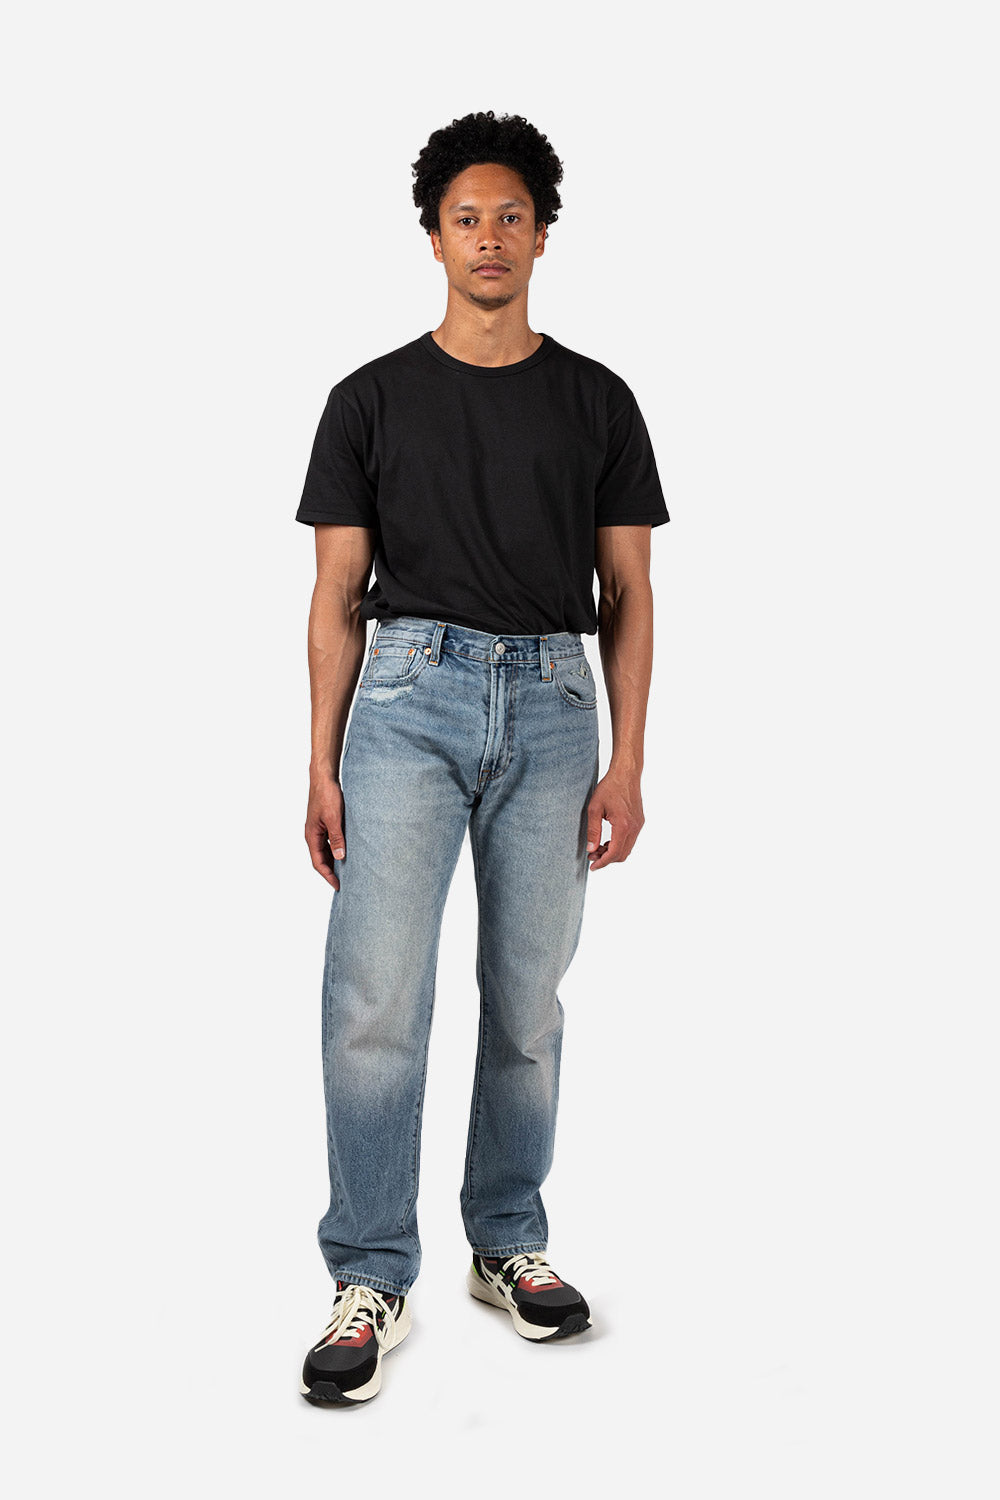 Levi's 551Z Authentic Straight Denim in Hula Hopper - Wallace Mercanti